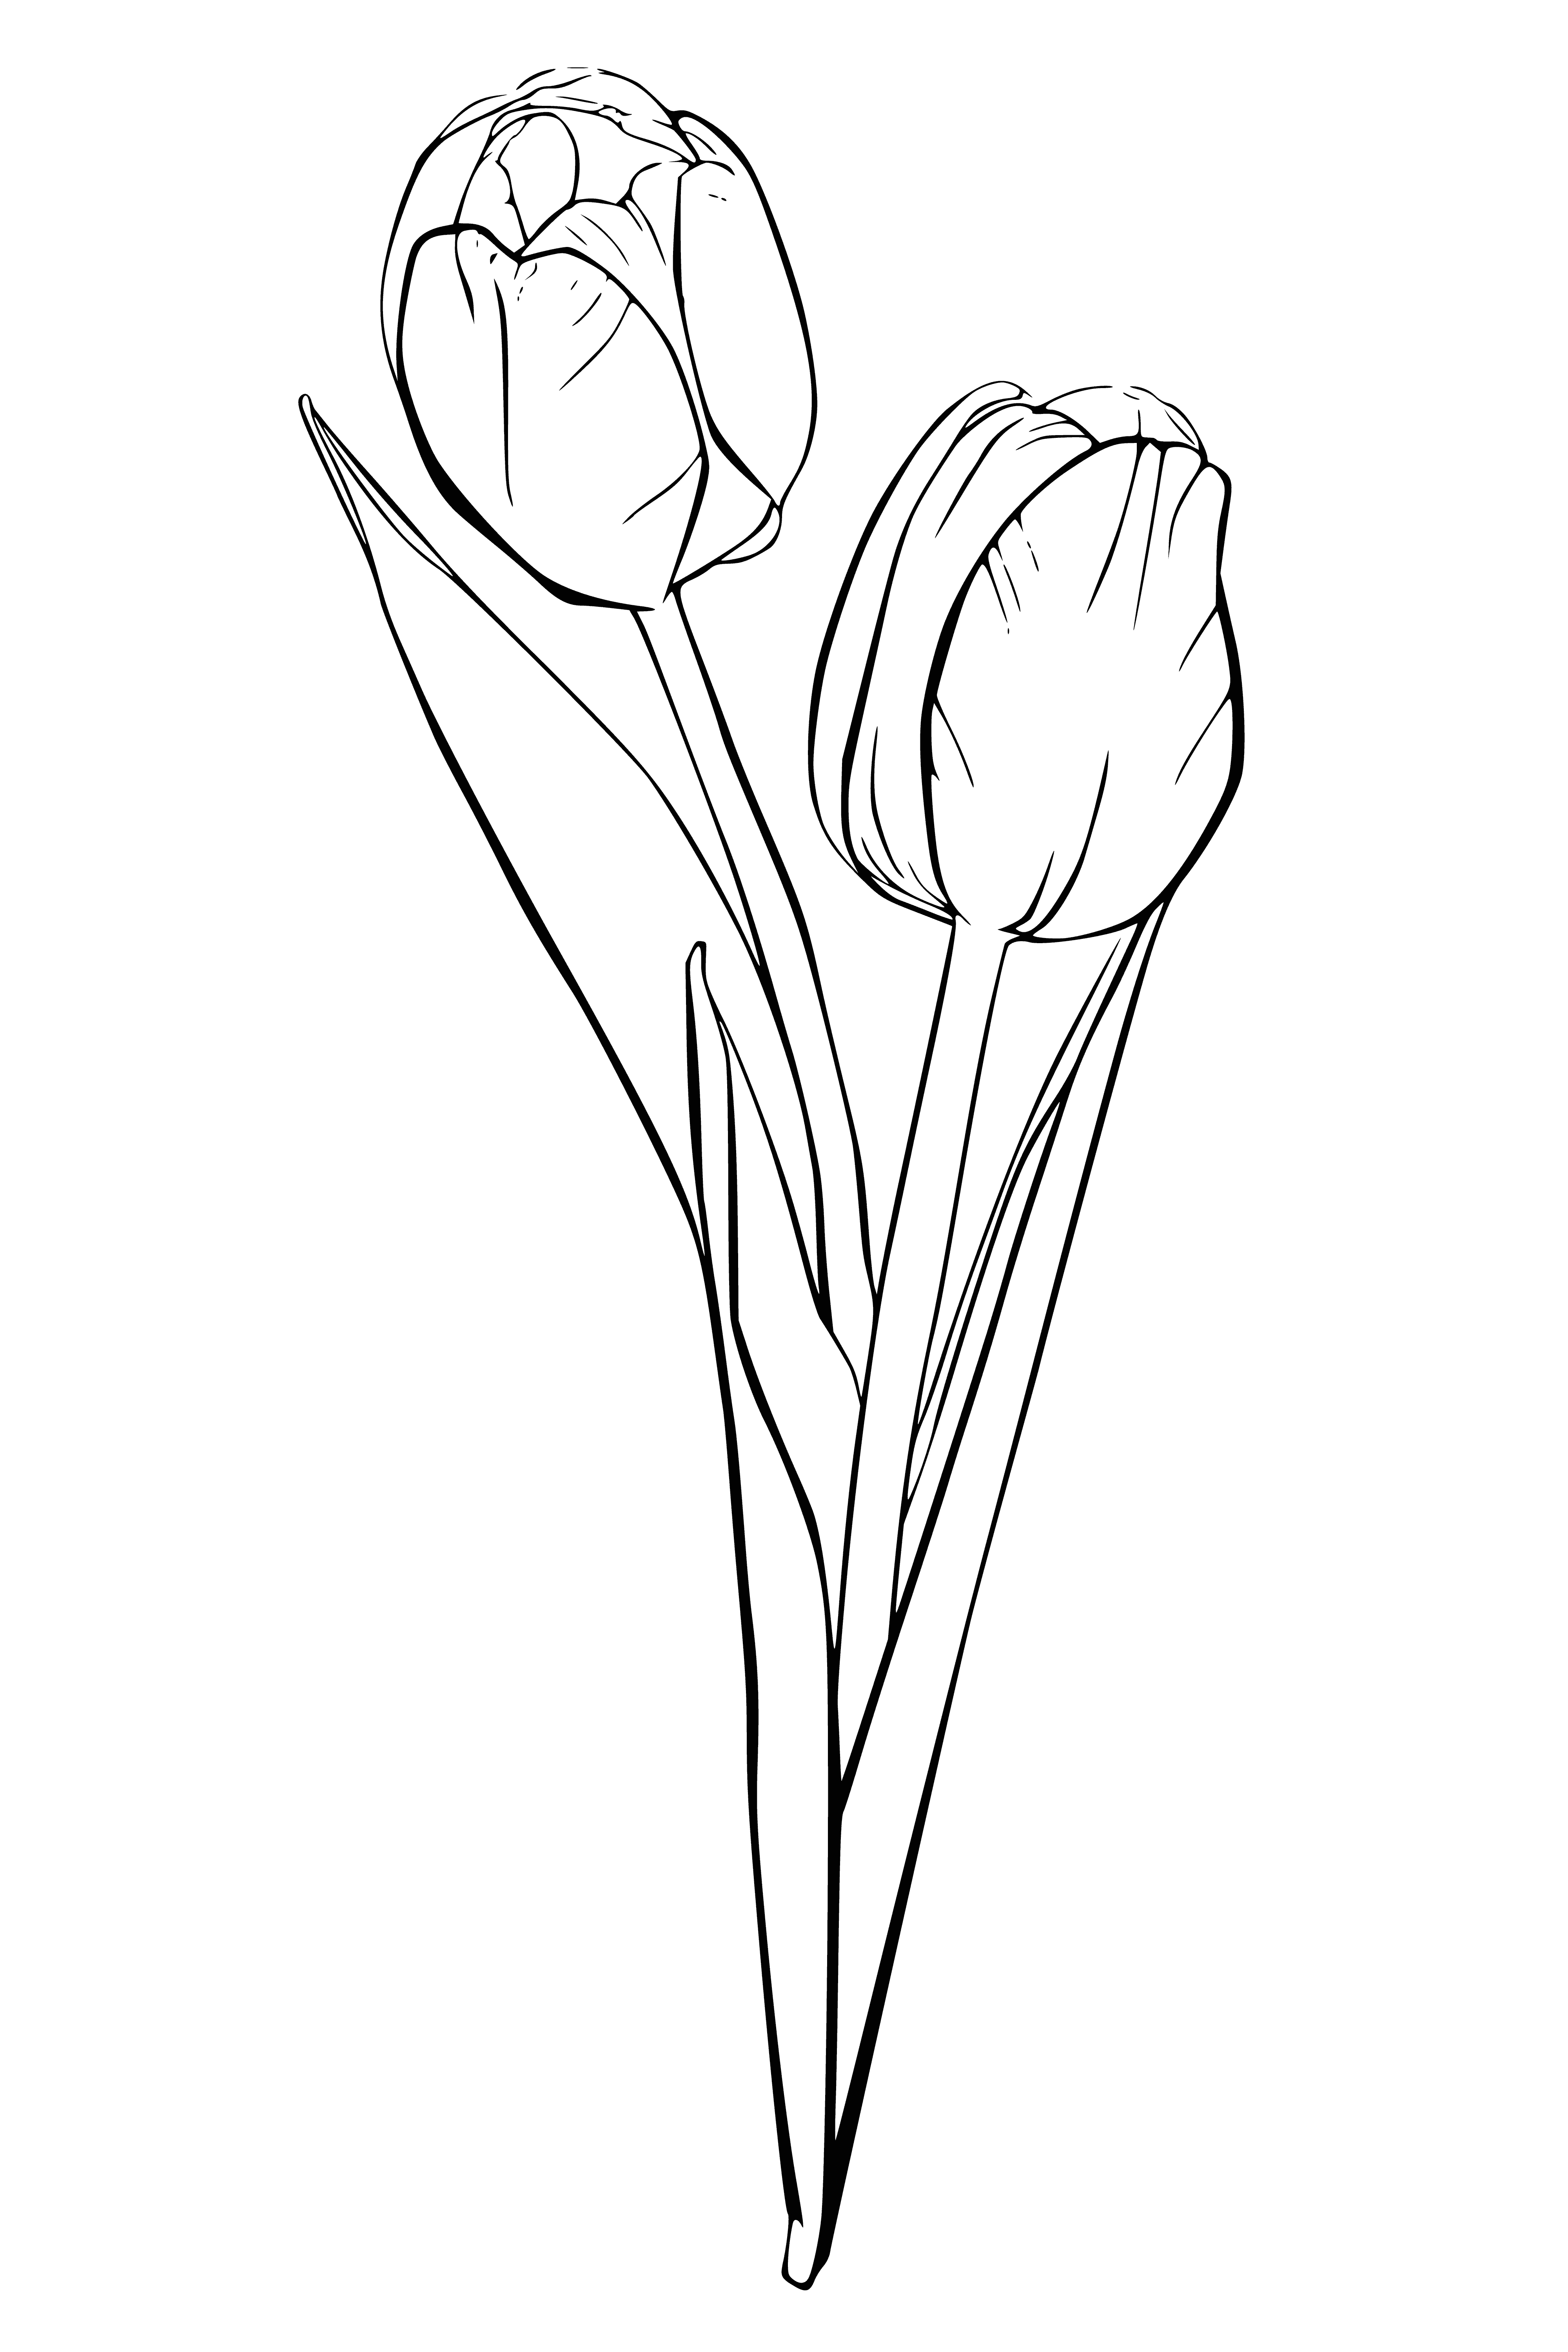 coloring page: Tulips are popular, spring-flowering bulbs with long stems & colorful petals. They come in shades of pink, red, yellow & orange & are easily recognized by their fringed petals.